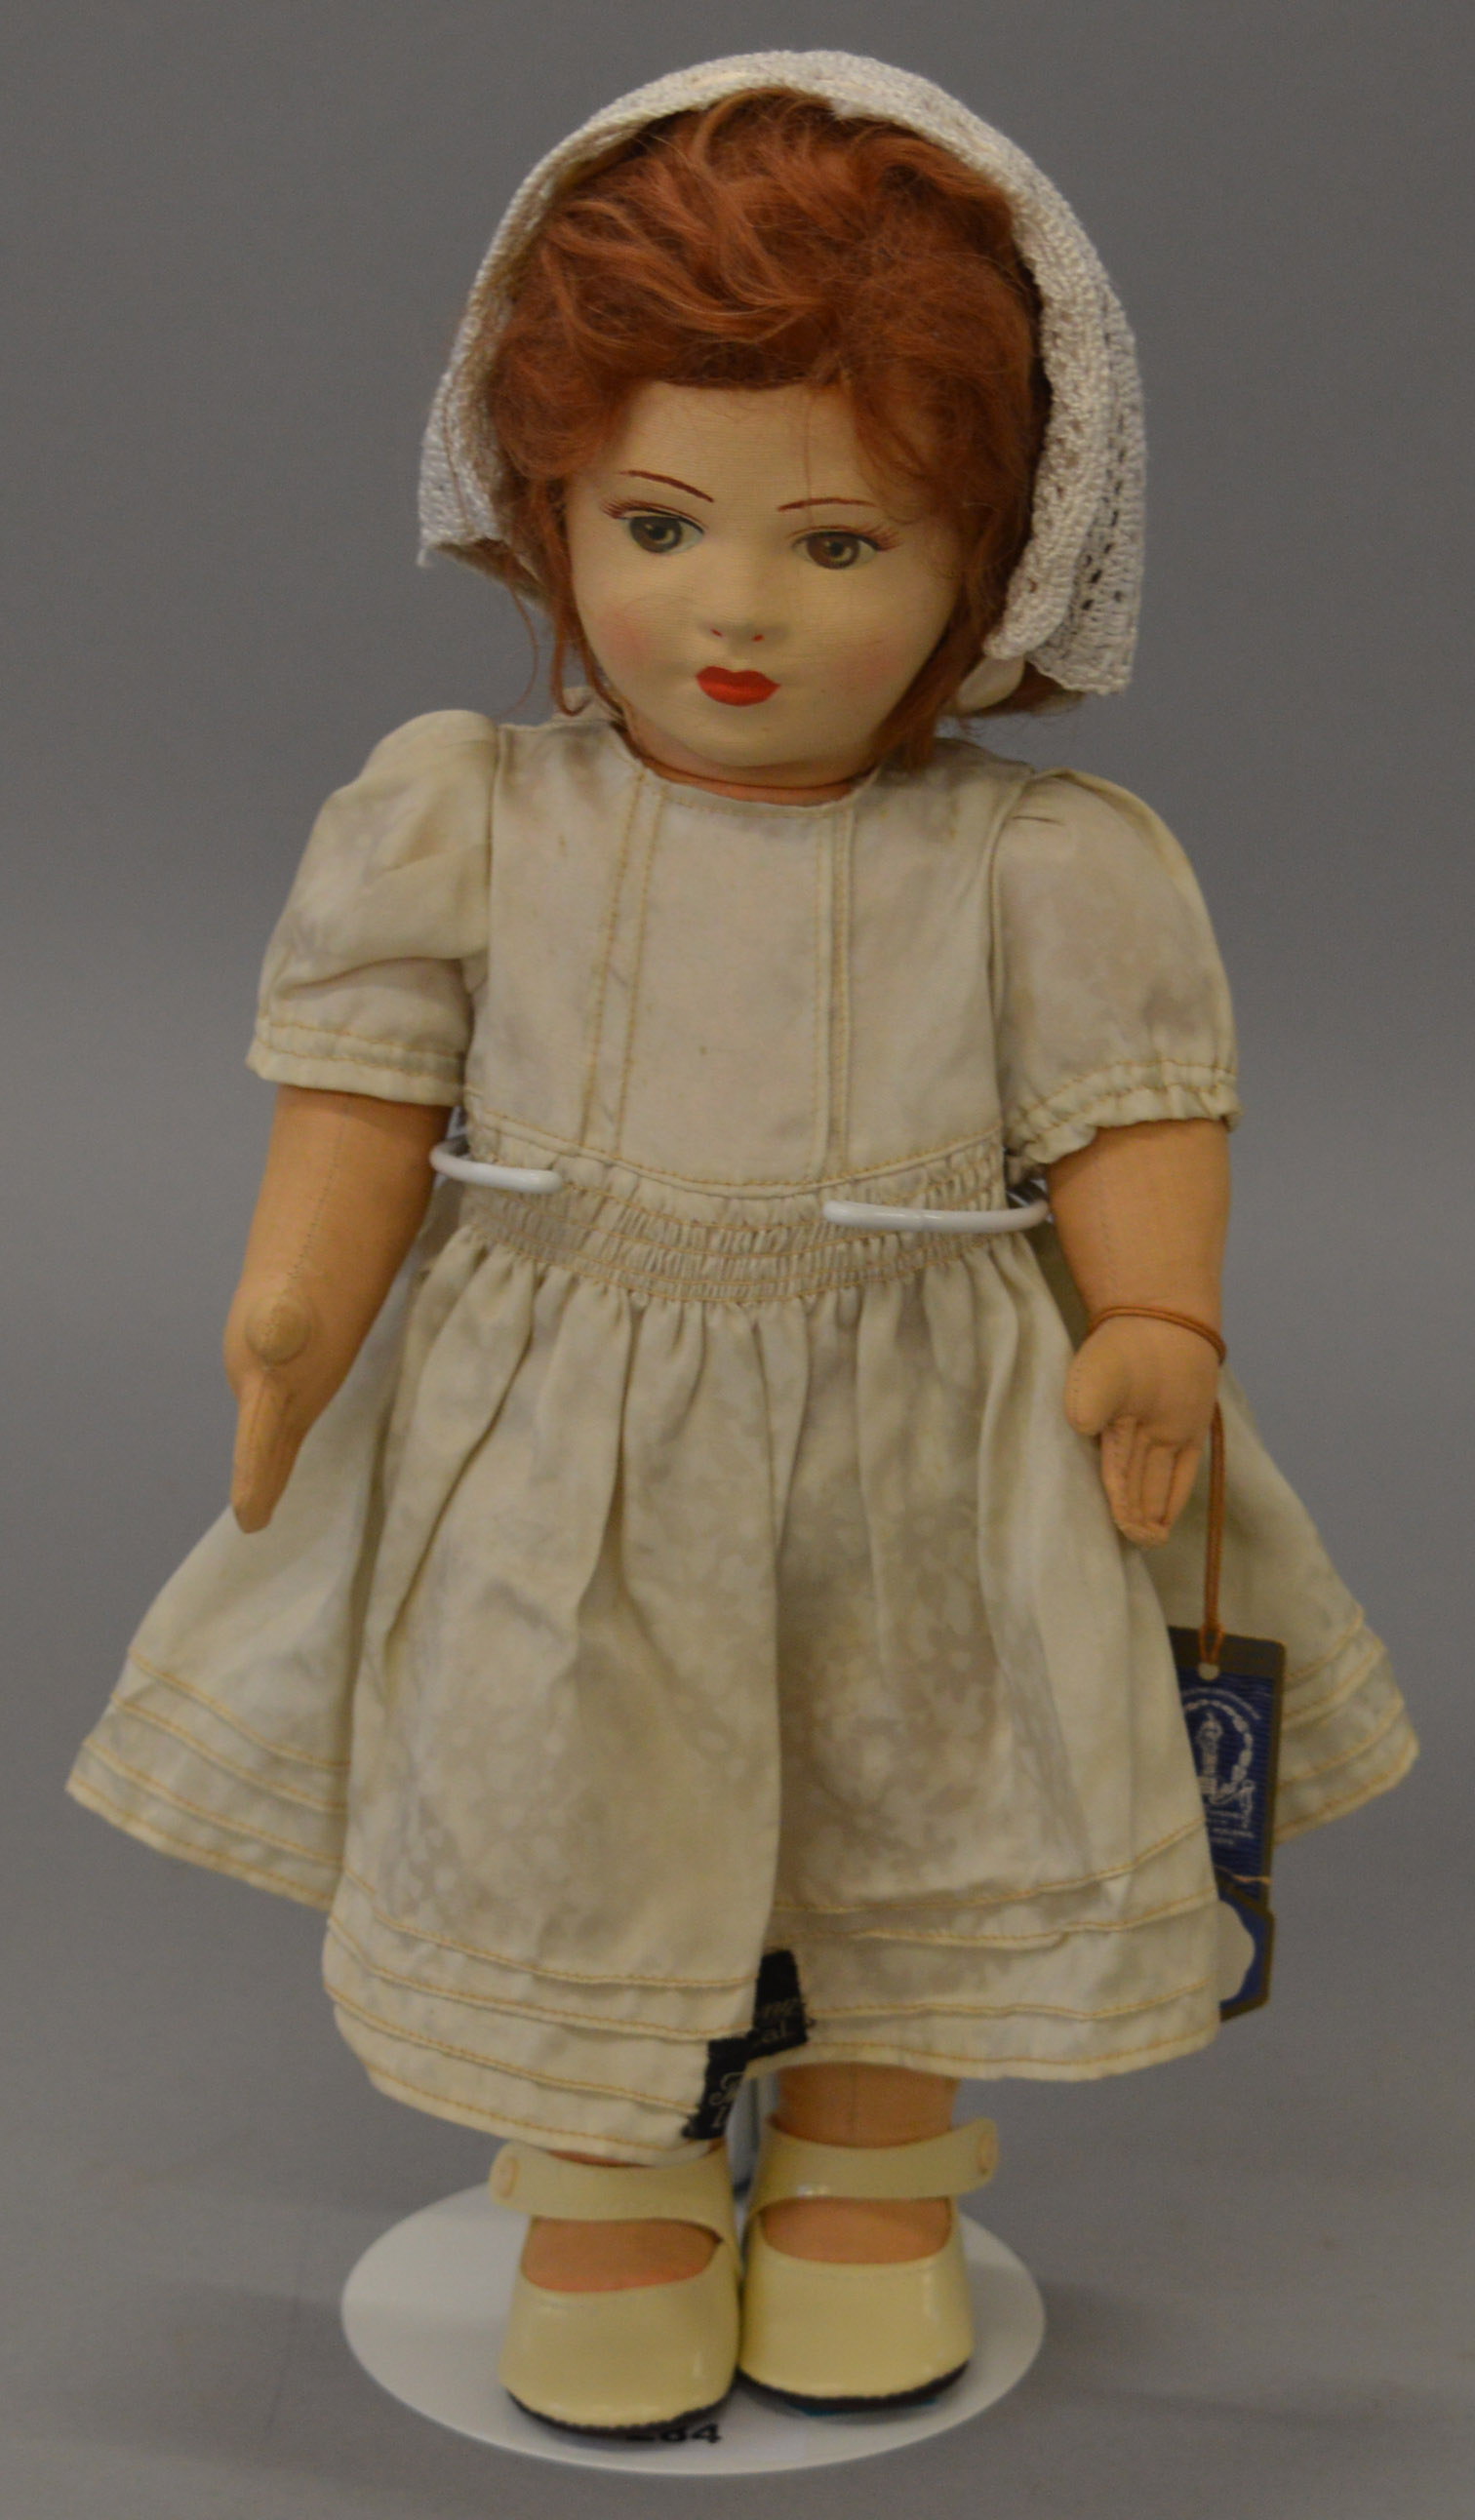 A 14 inch Chad Valley Girl Doll with stockinette face.